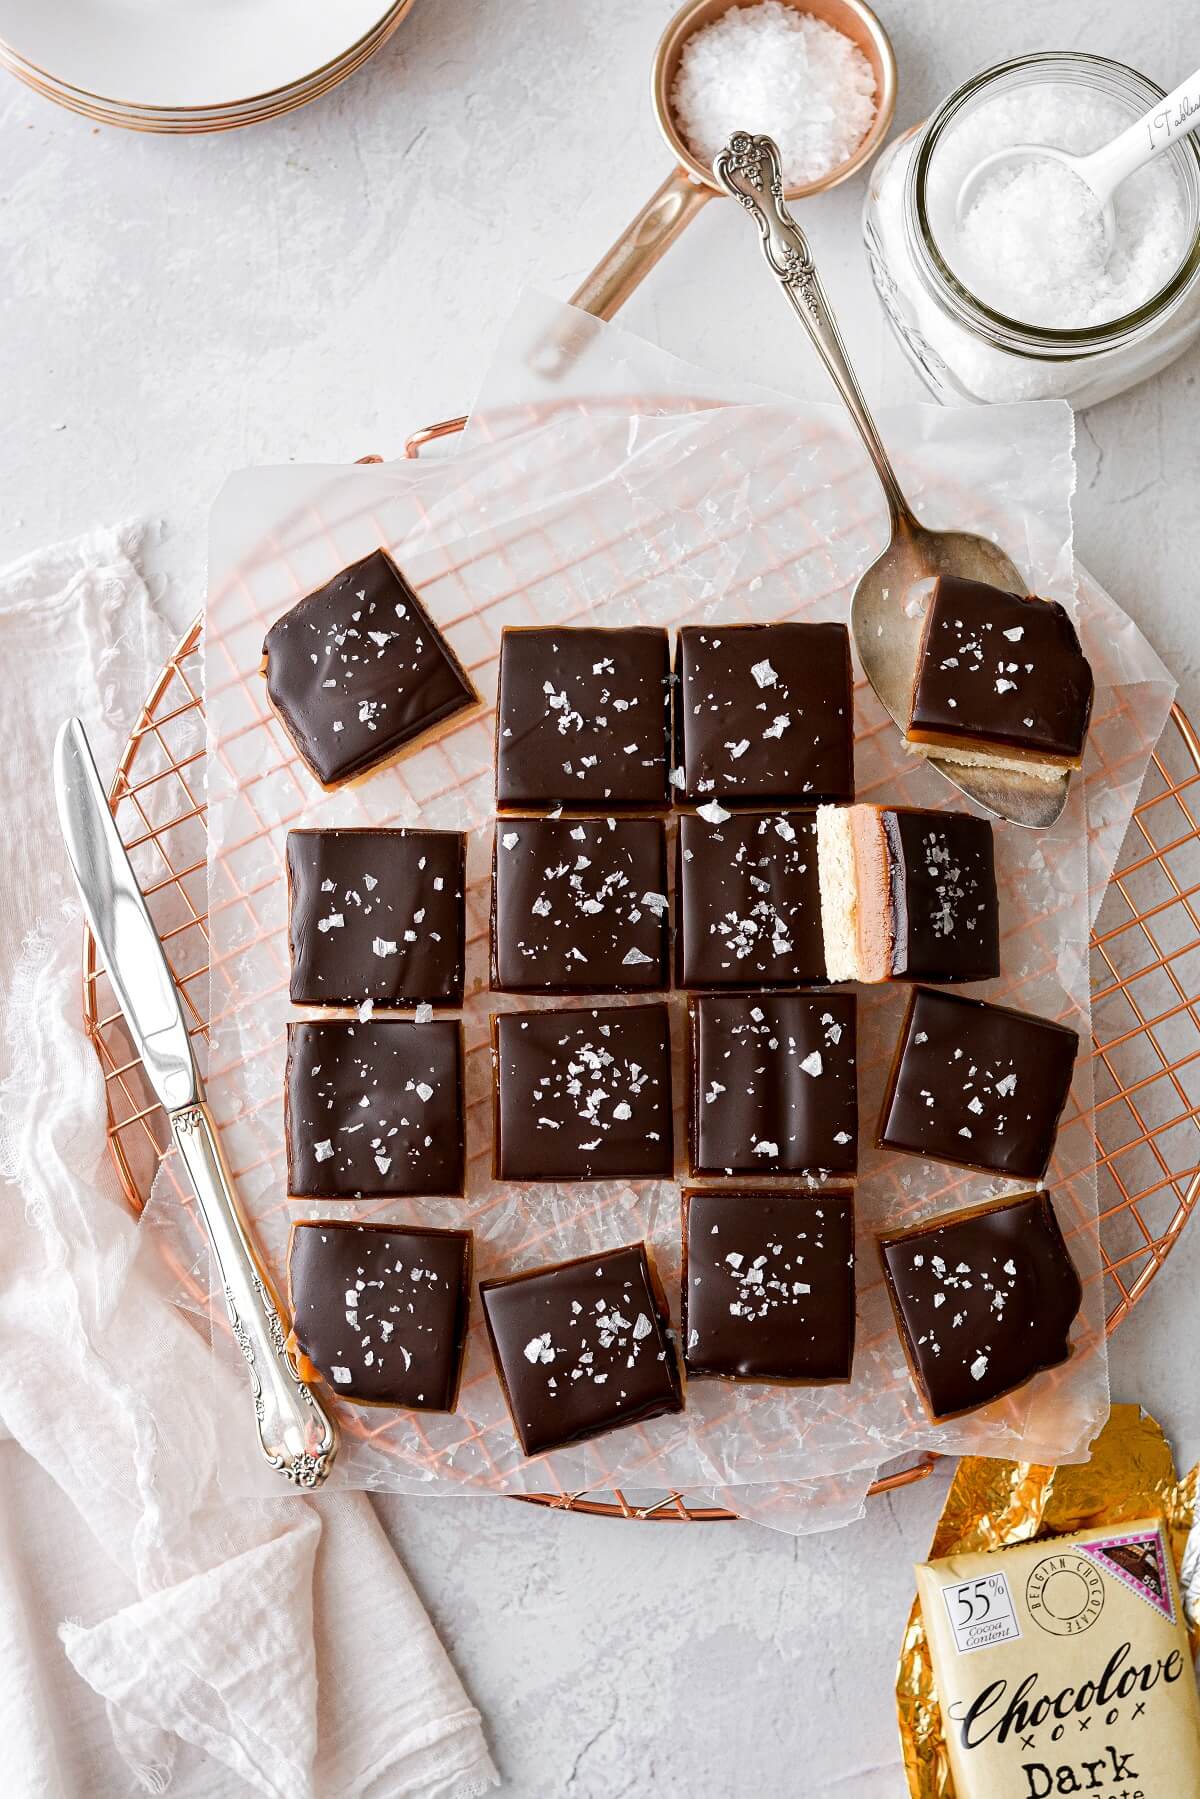 Millionaire's Shortbread, cut into squares, and sprinkled with flaky salt.